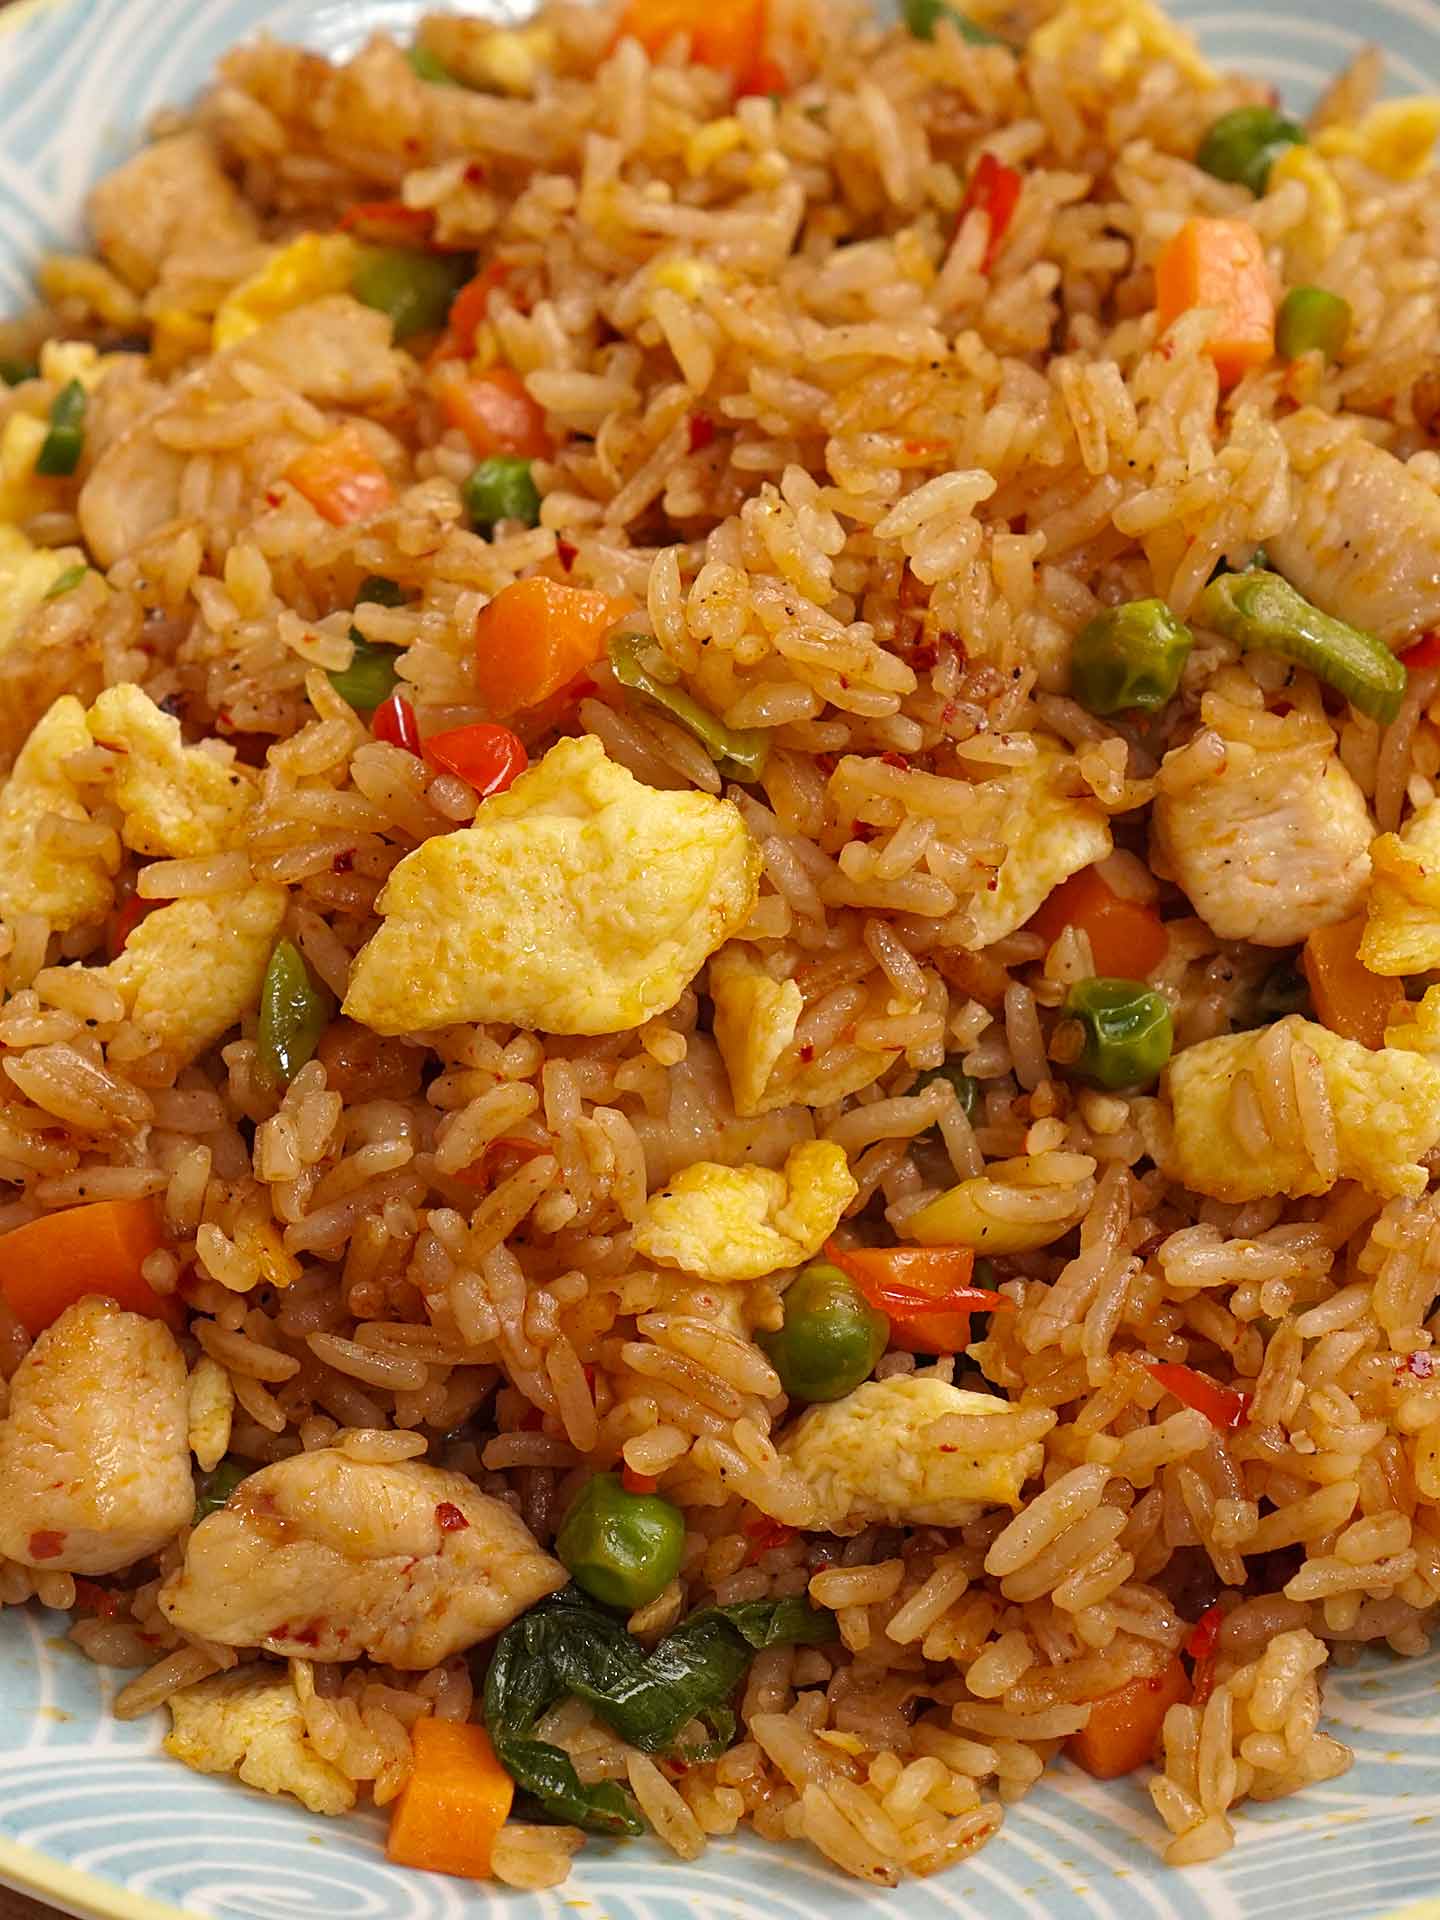 Fried Rice And Fried Chicken